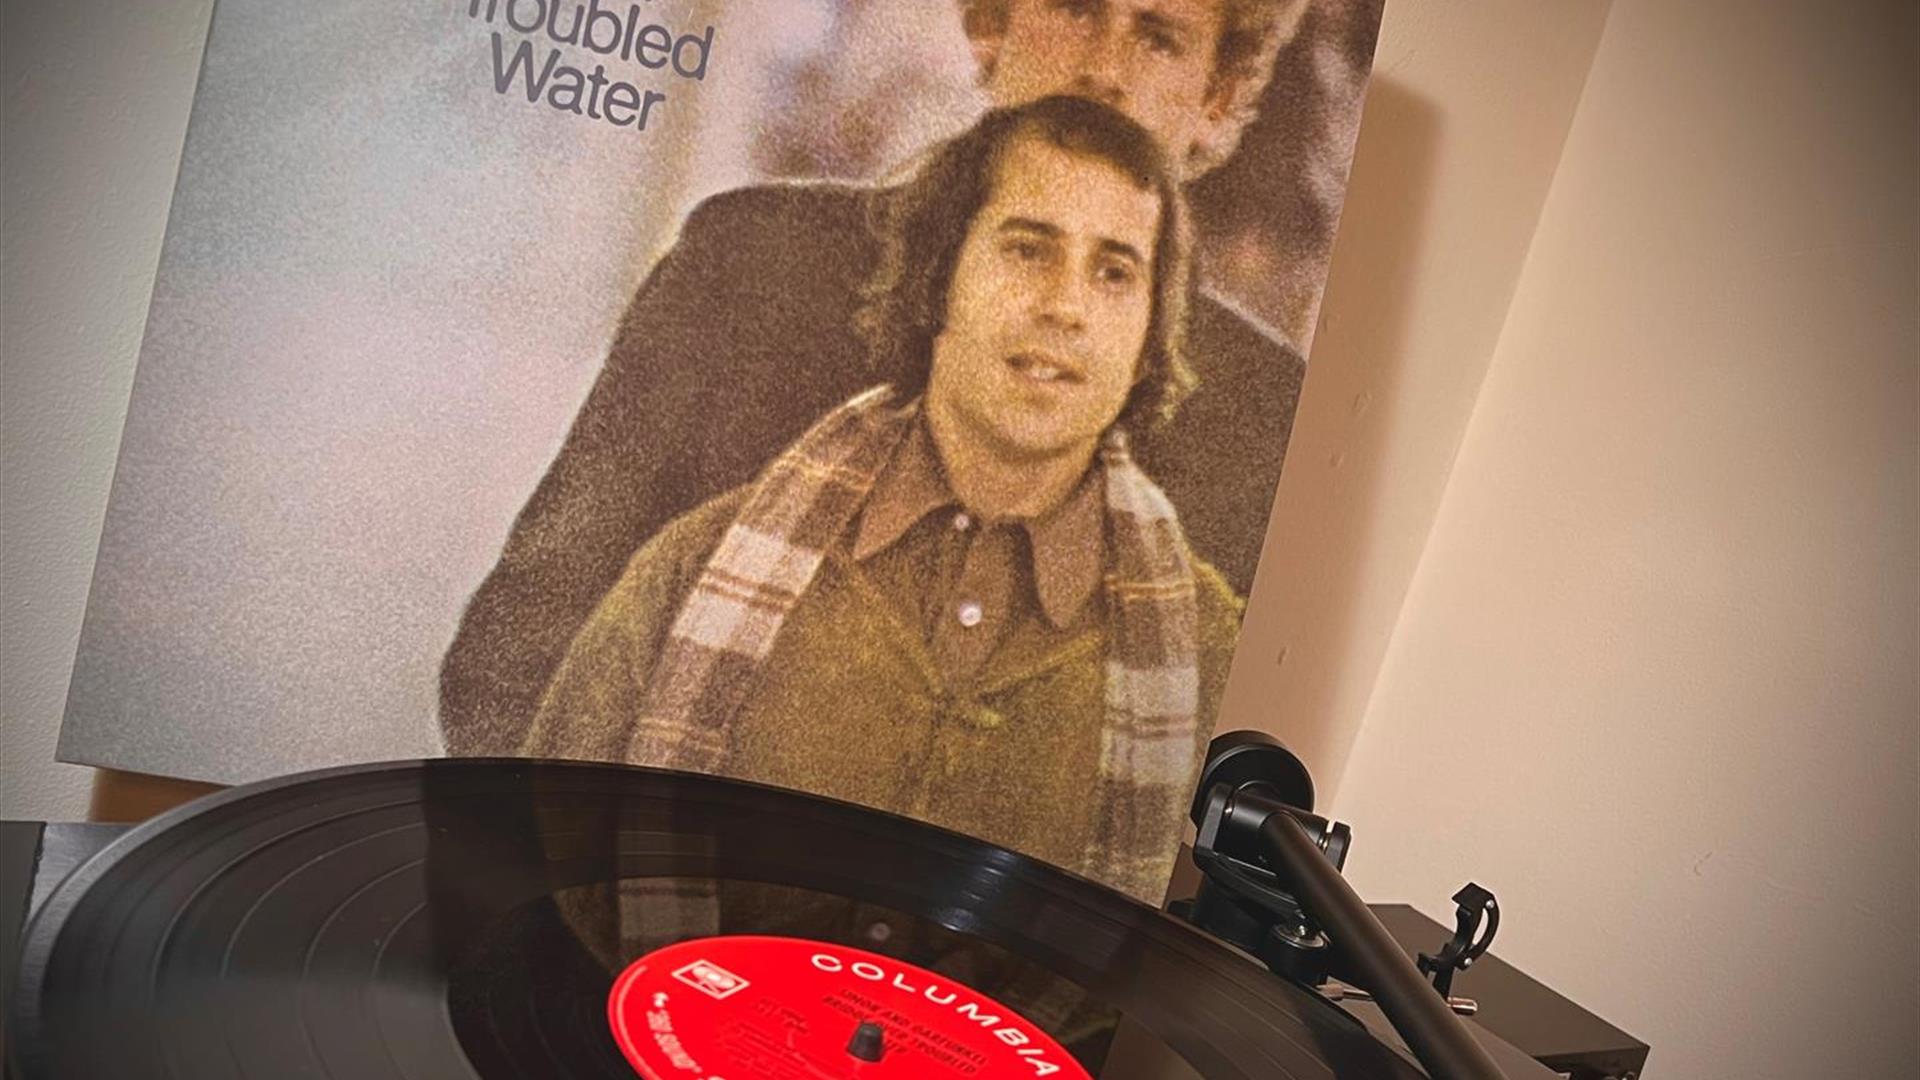 Bridge Over Troubled Water Album cover showing a visual image of Simon & Garfunkel with a record player to the fore